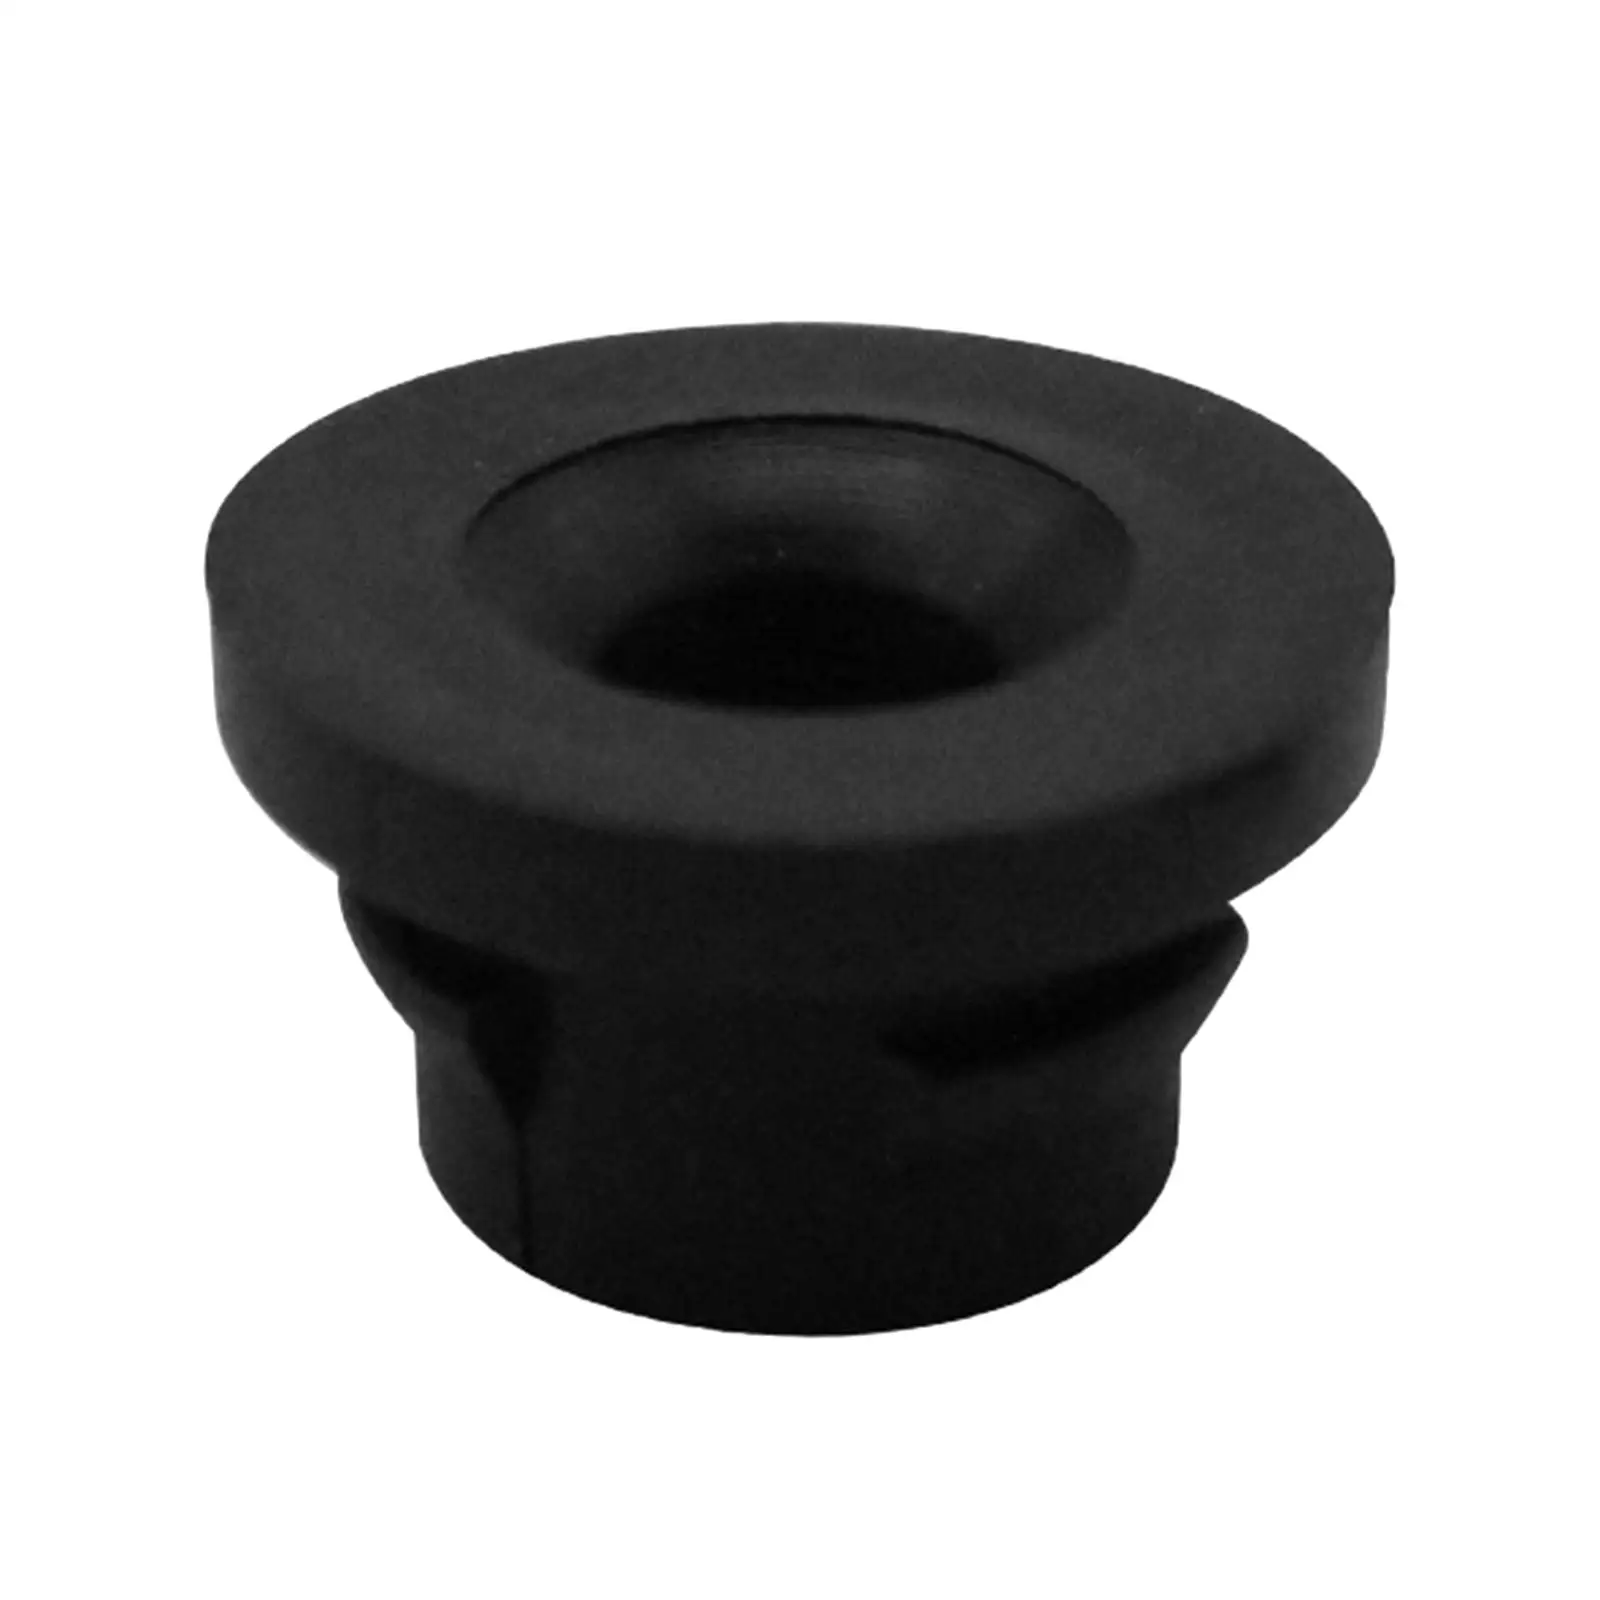 Car Air Filter Rubber Insert 1422A3 Accessories 00001422A3 Bsg70136001 1422 A3 for 1.6 Hdi  C3 for 